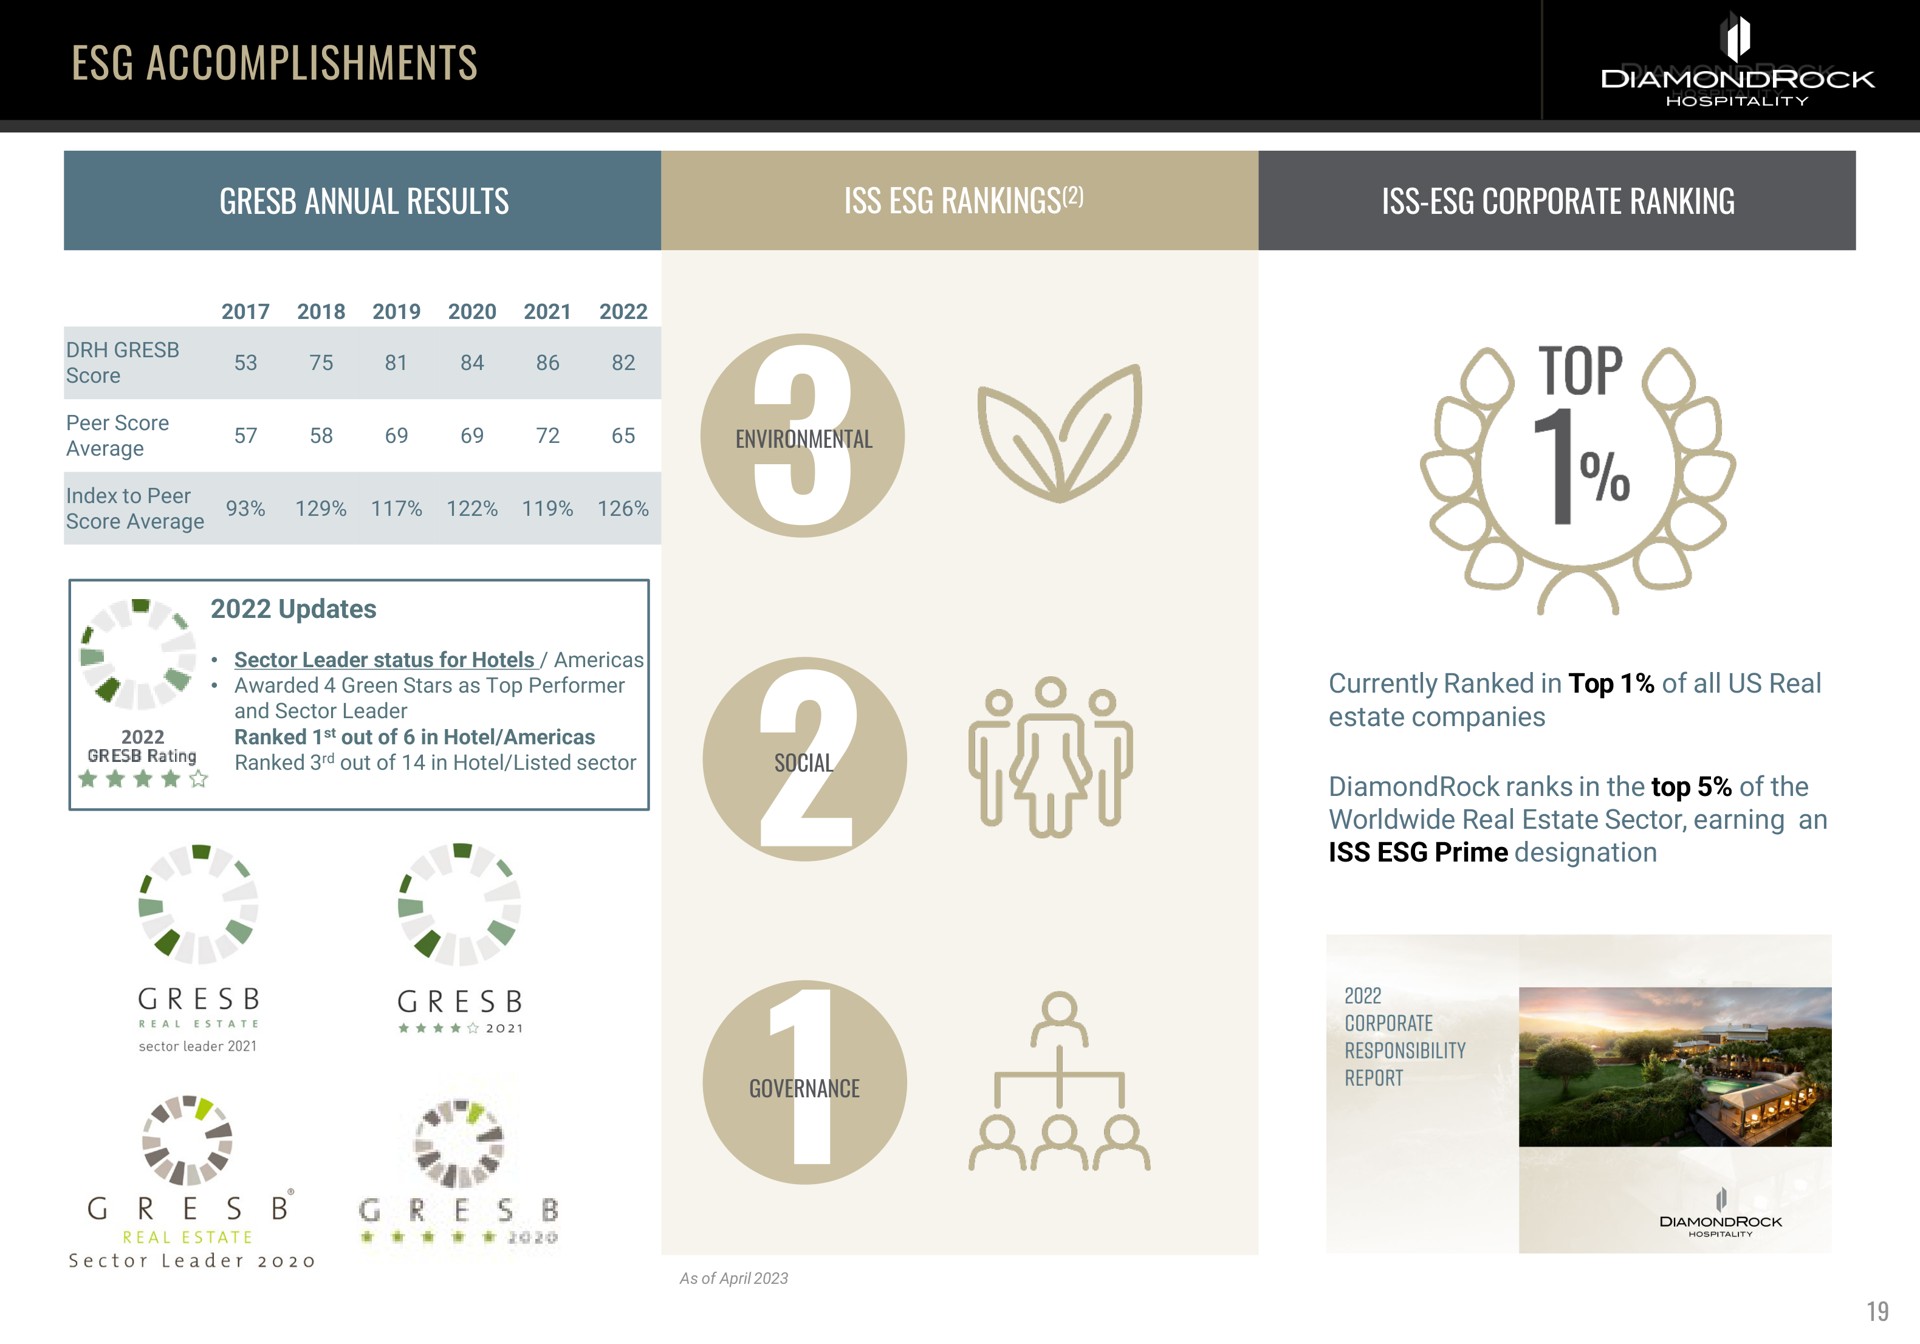 accomplishments urn annual results iss corporate ranking governance top | DiamondRock Hospitality